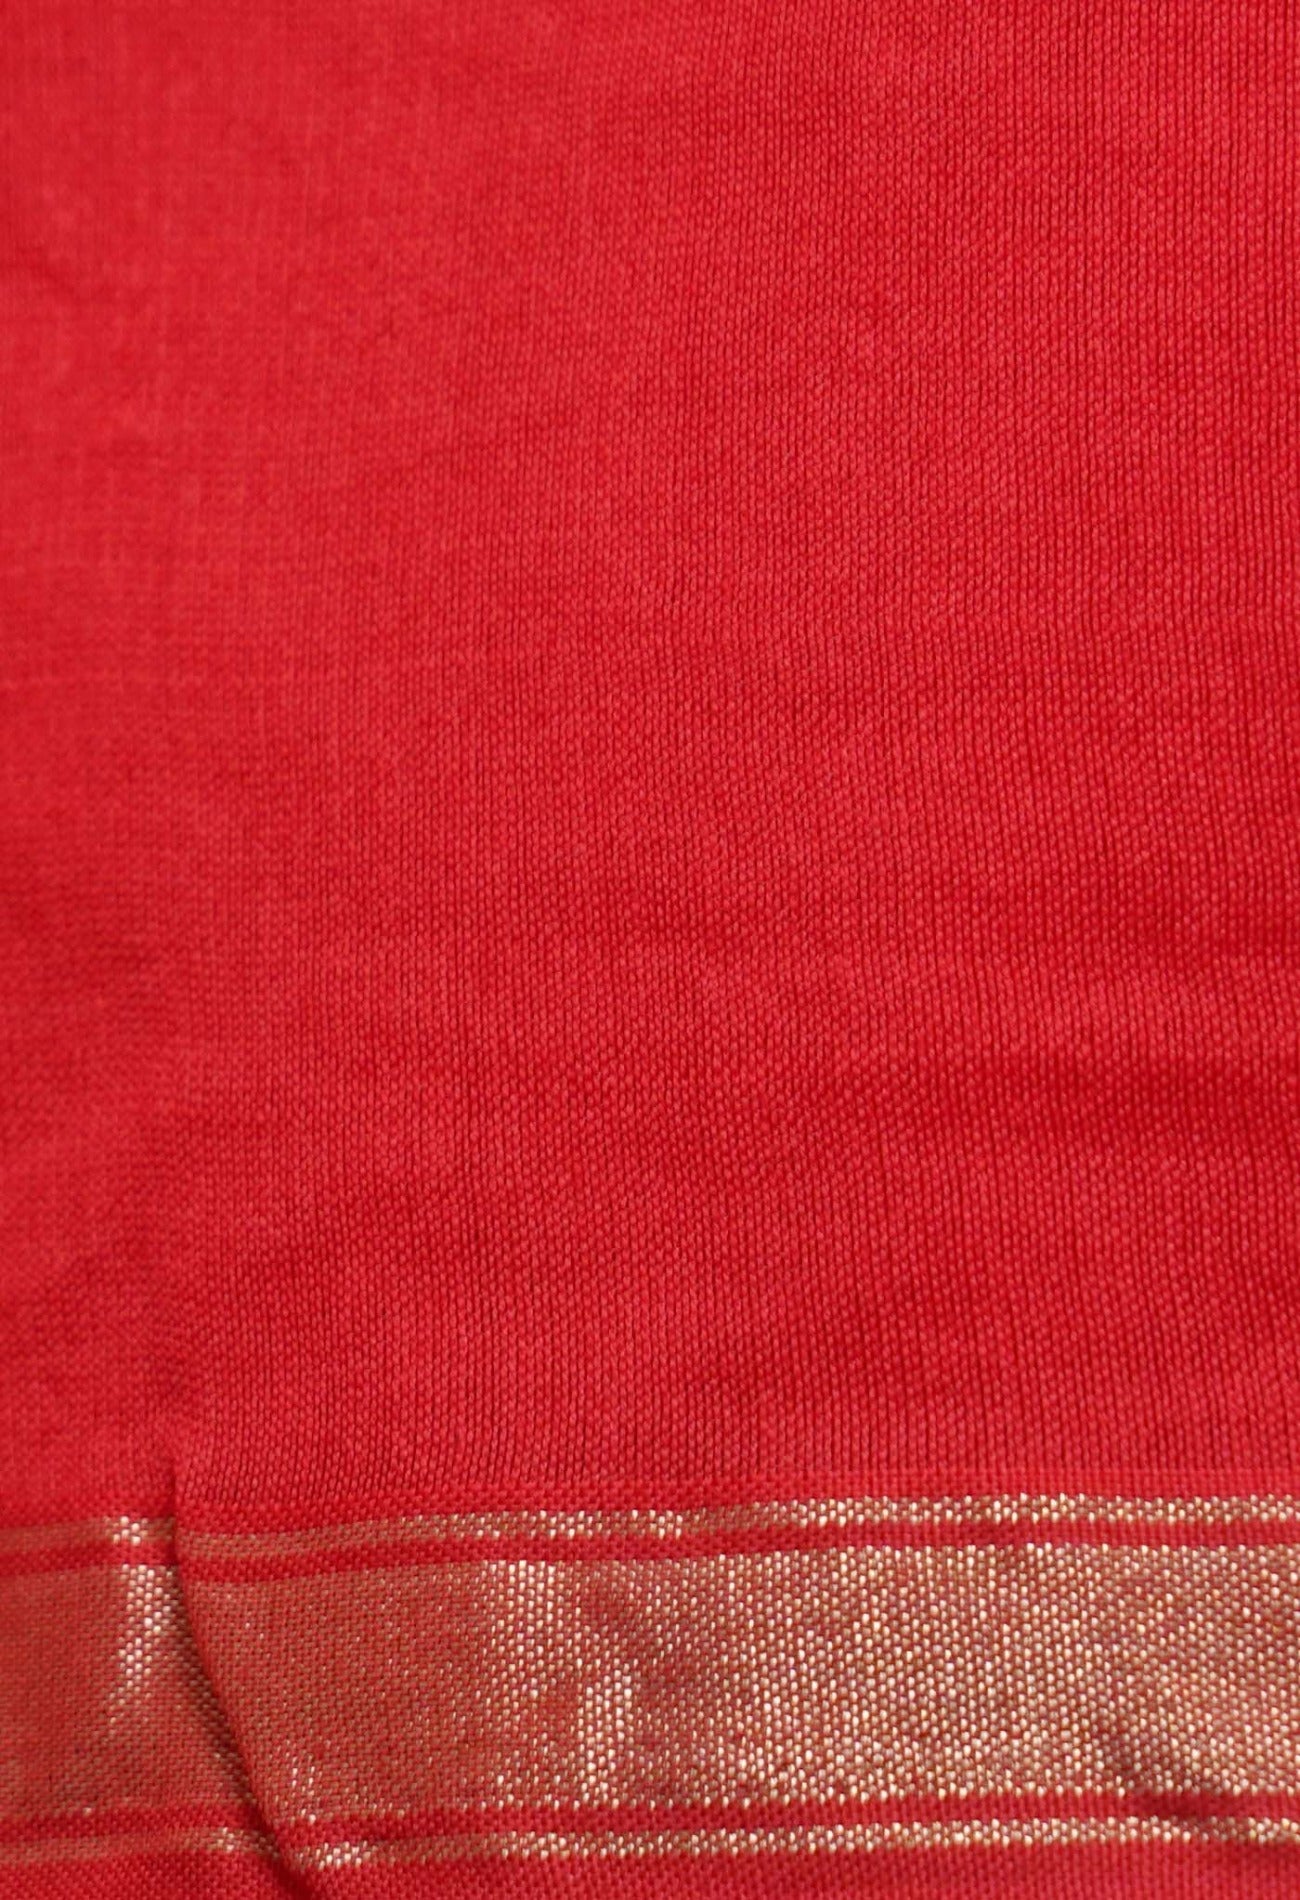 Online Shopping for Red Pure Chanderi Sico Saree with Weaving from Madhya Pradesh at Unnatisilks.com India
